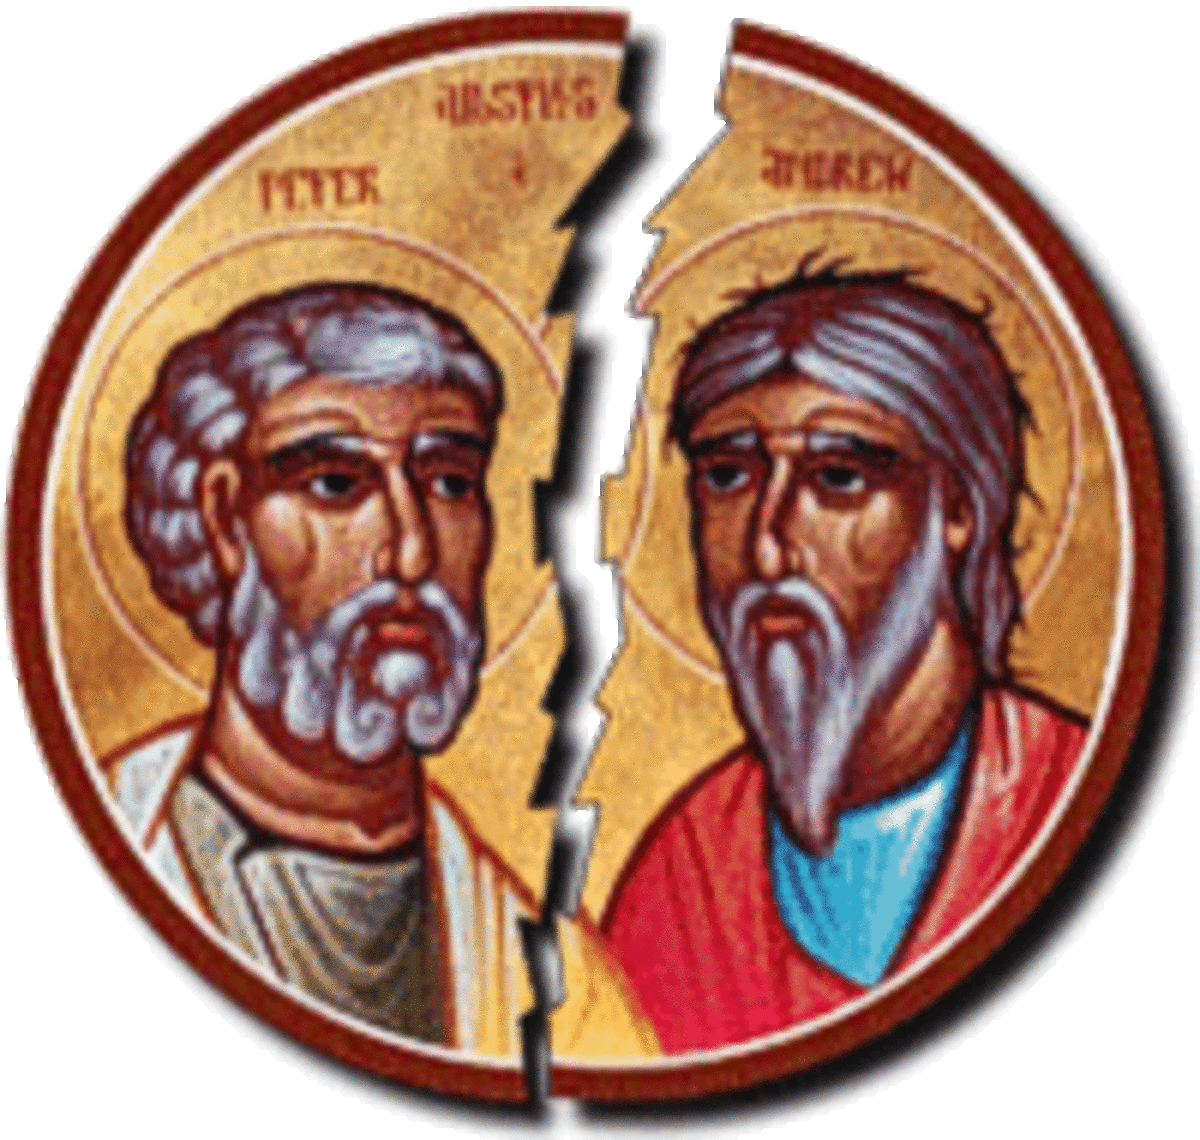 the-great-schism-in-the-medieval-church-lesson-plan